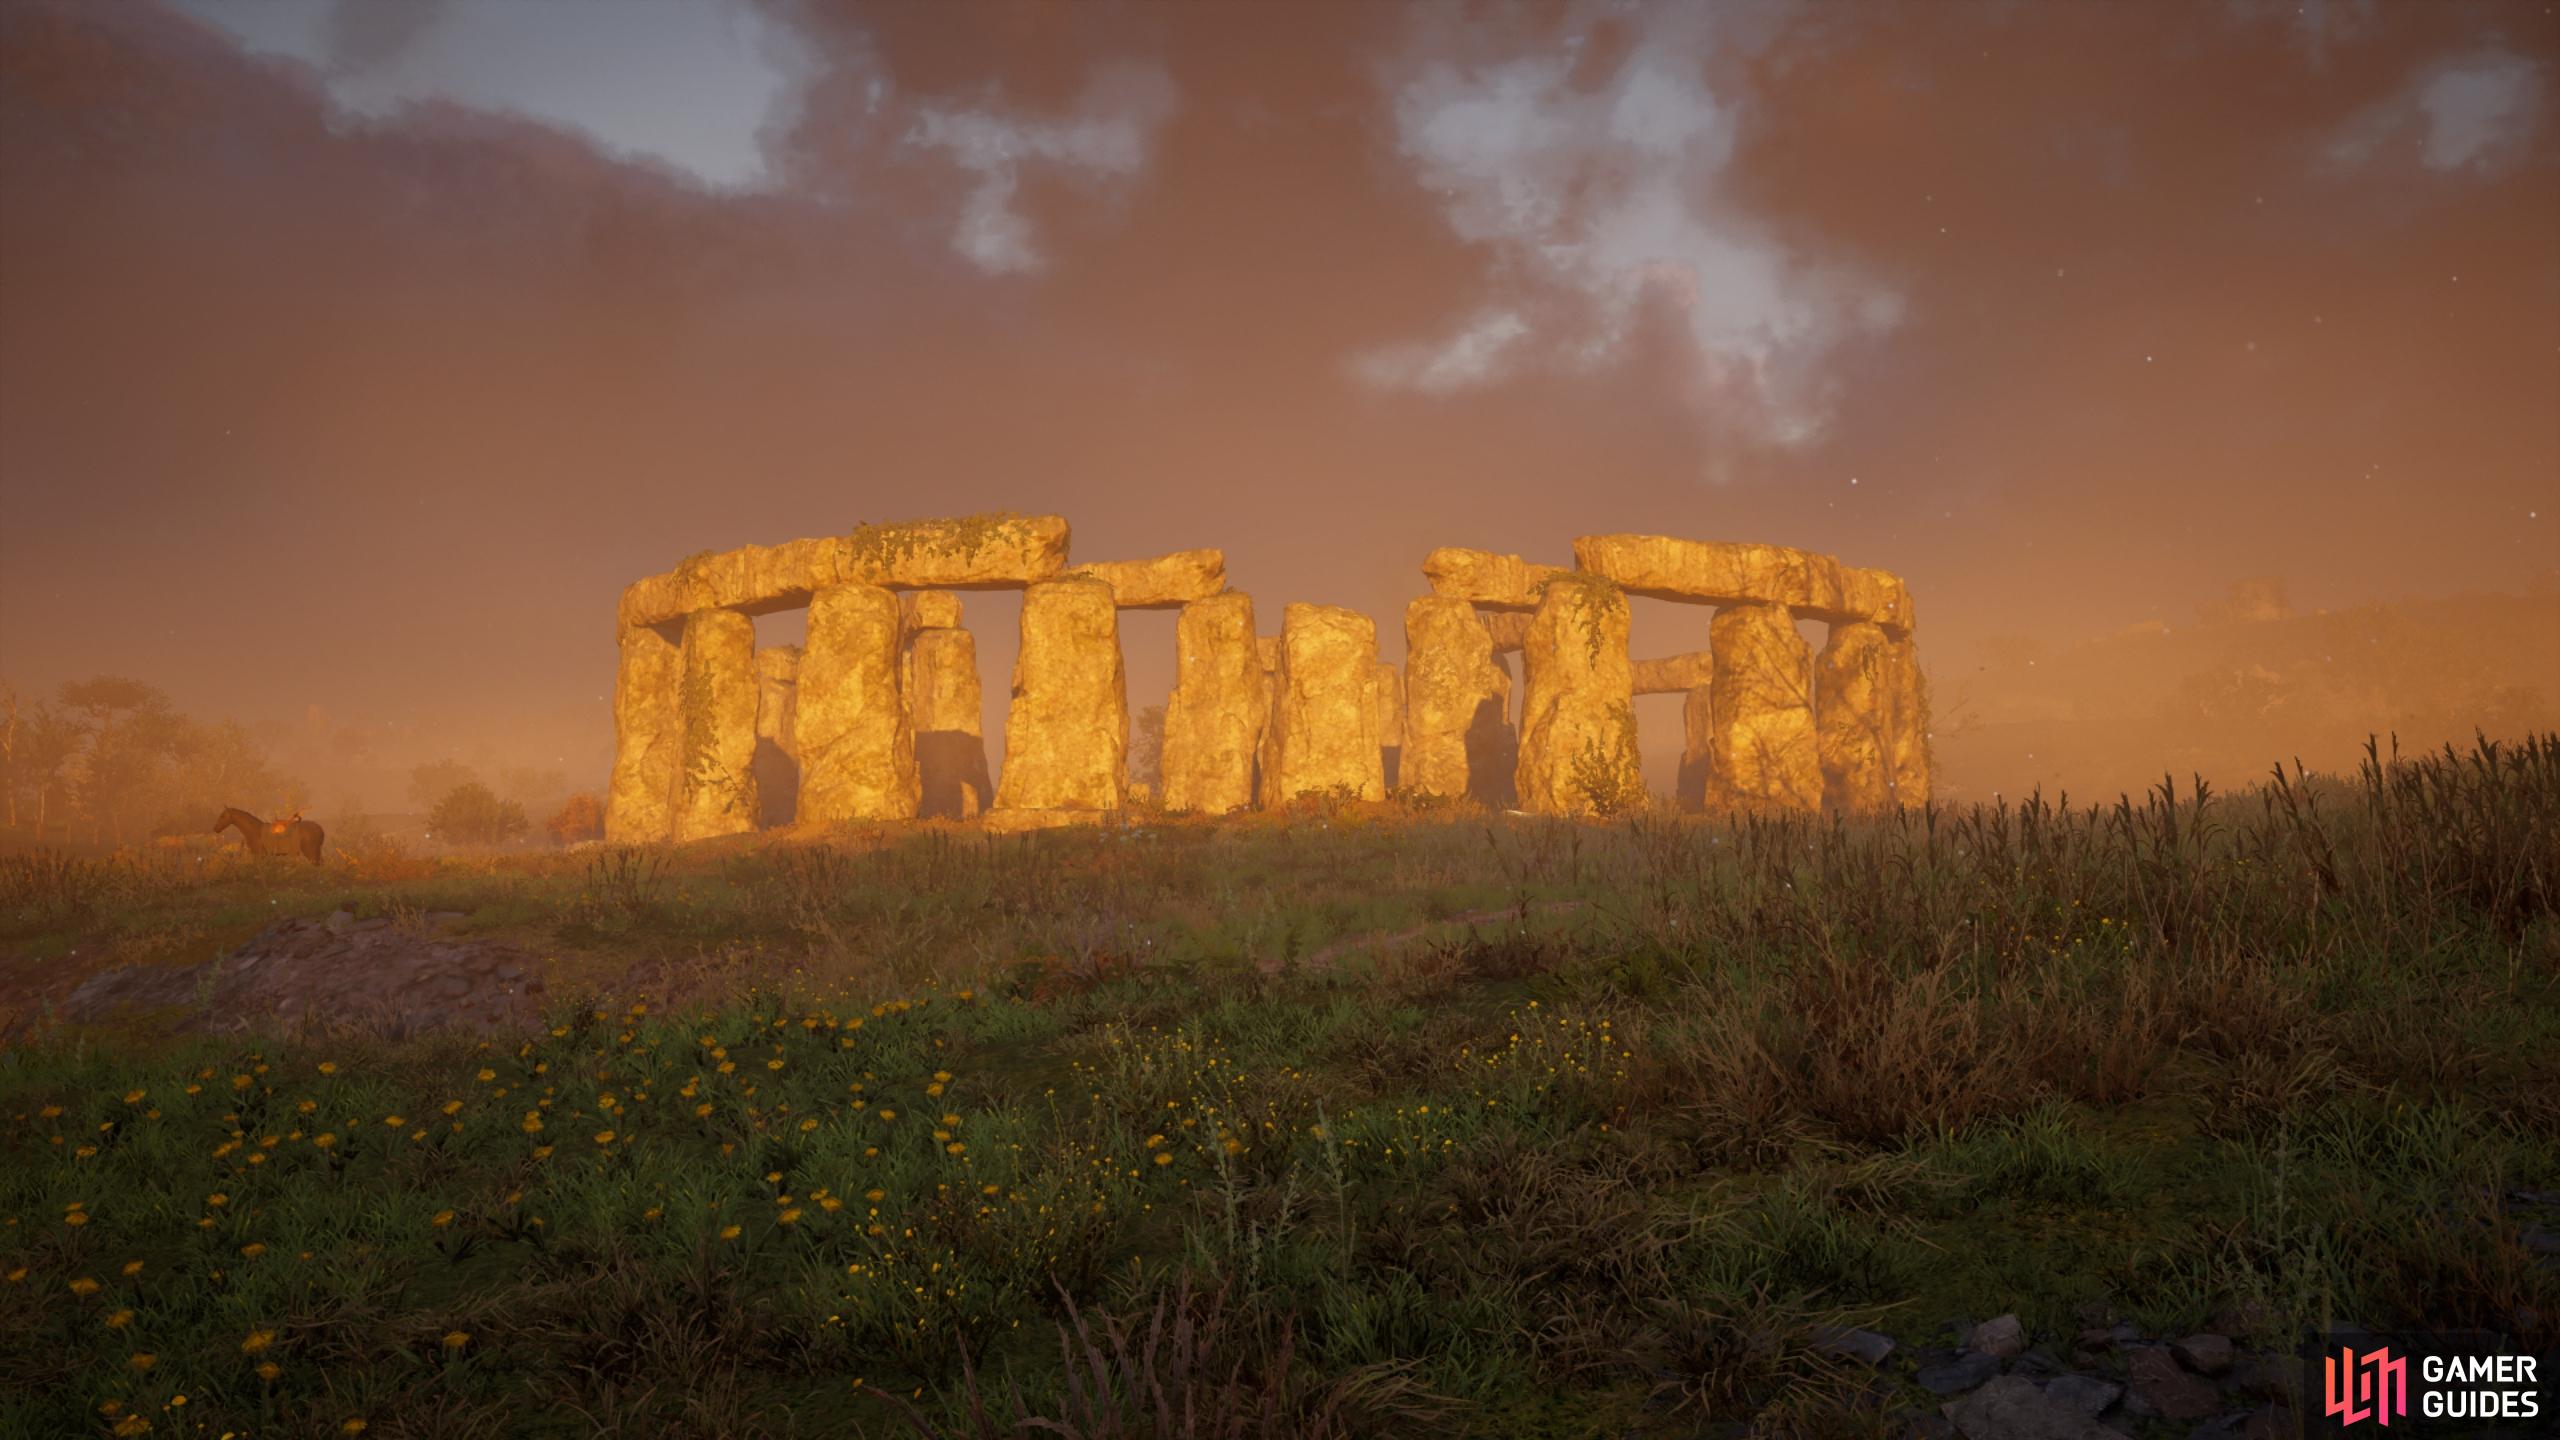 Megalith monuments like the Stonehenge are found across Ireland, so well likely see some more of those in the new expansion.